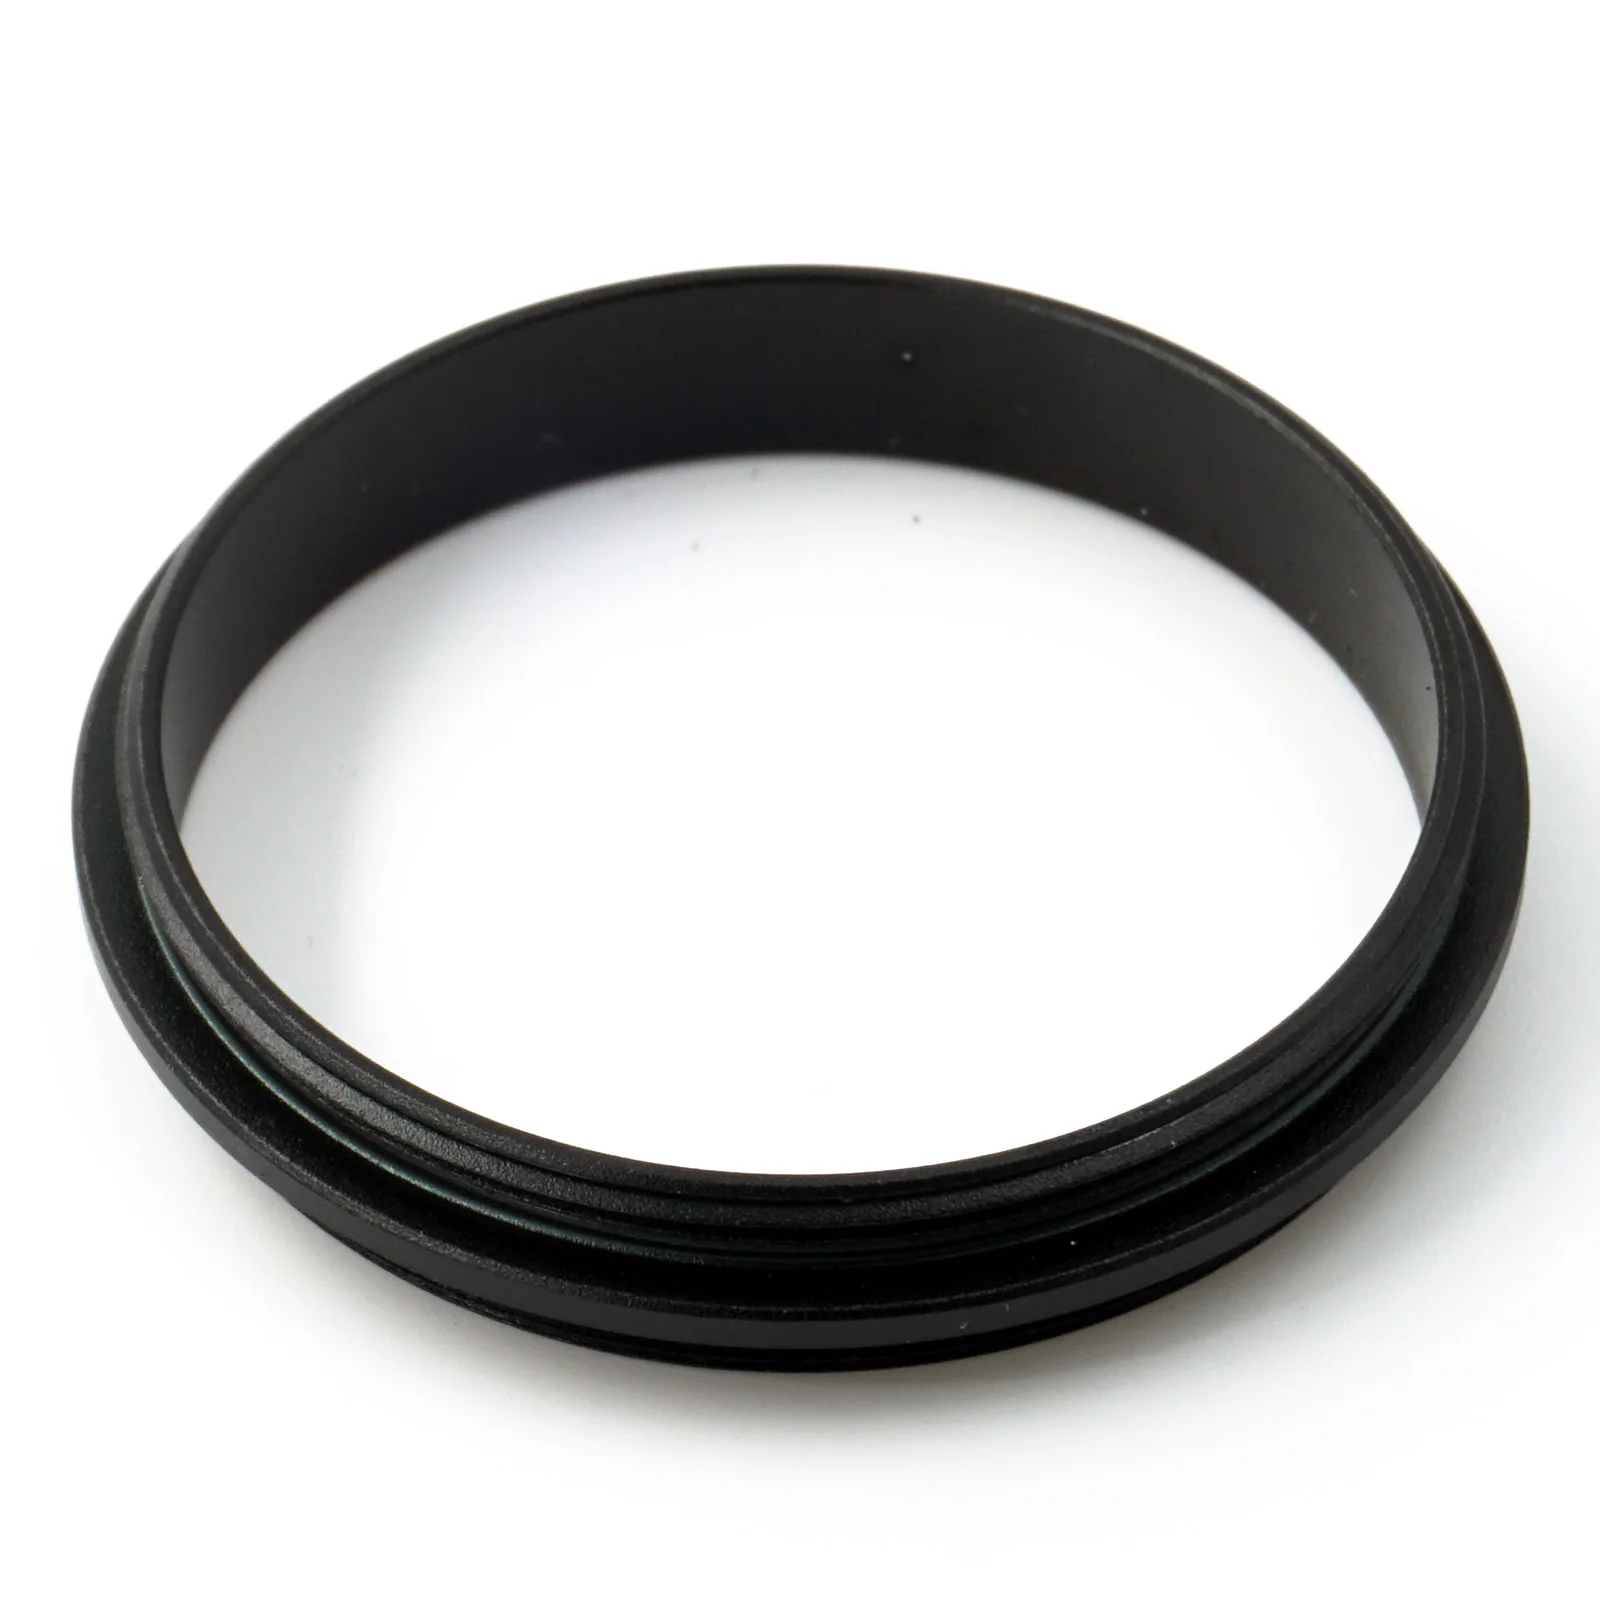 

42-T2 Male to Male 42mm x1 - 42mm x0.75 Double Outer Thread Lens Adapter Ring